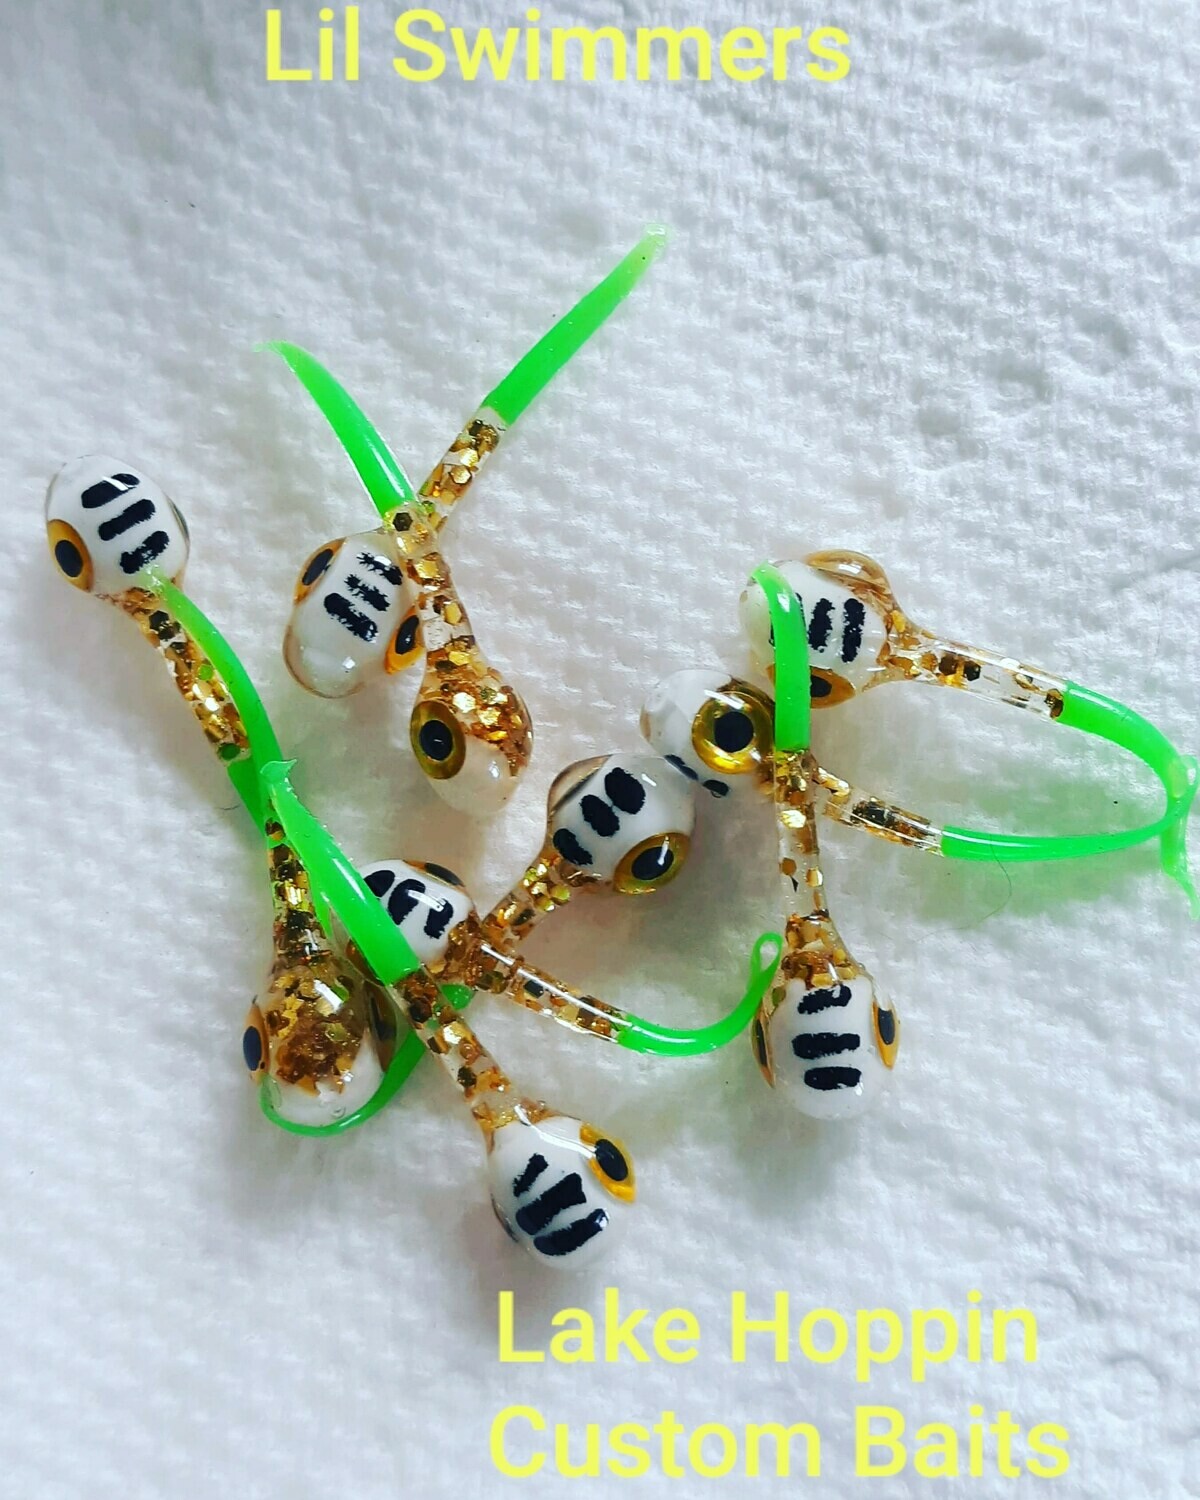 1 1/4" Big eyed Lil Swimmers tiger 10 per pk white top/gold flake bottom/ chartruse green tip tail